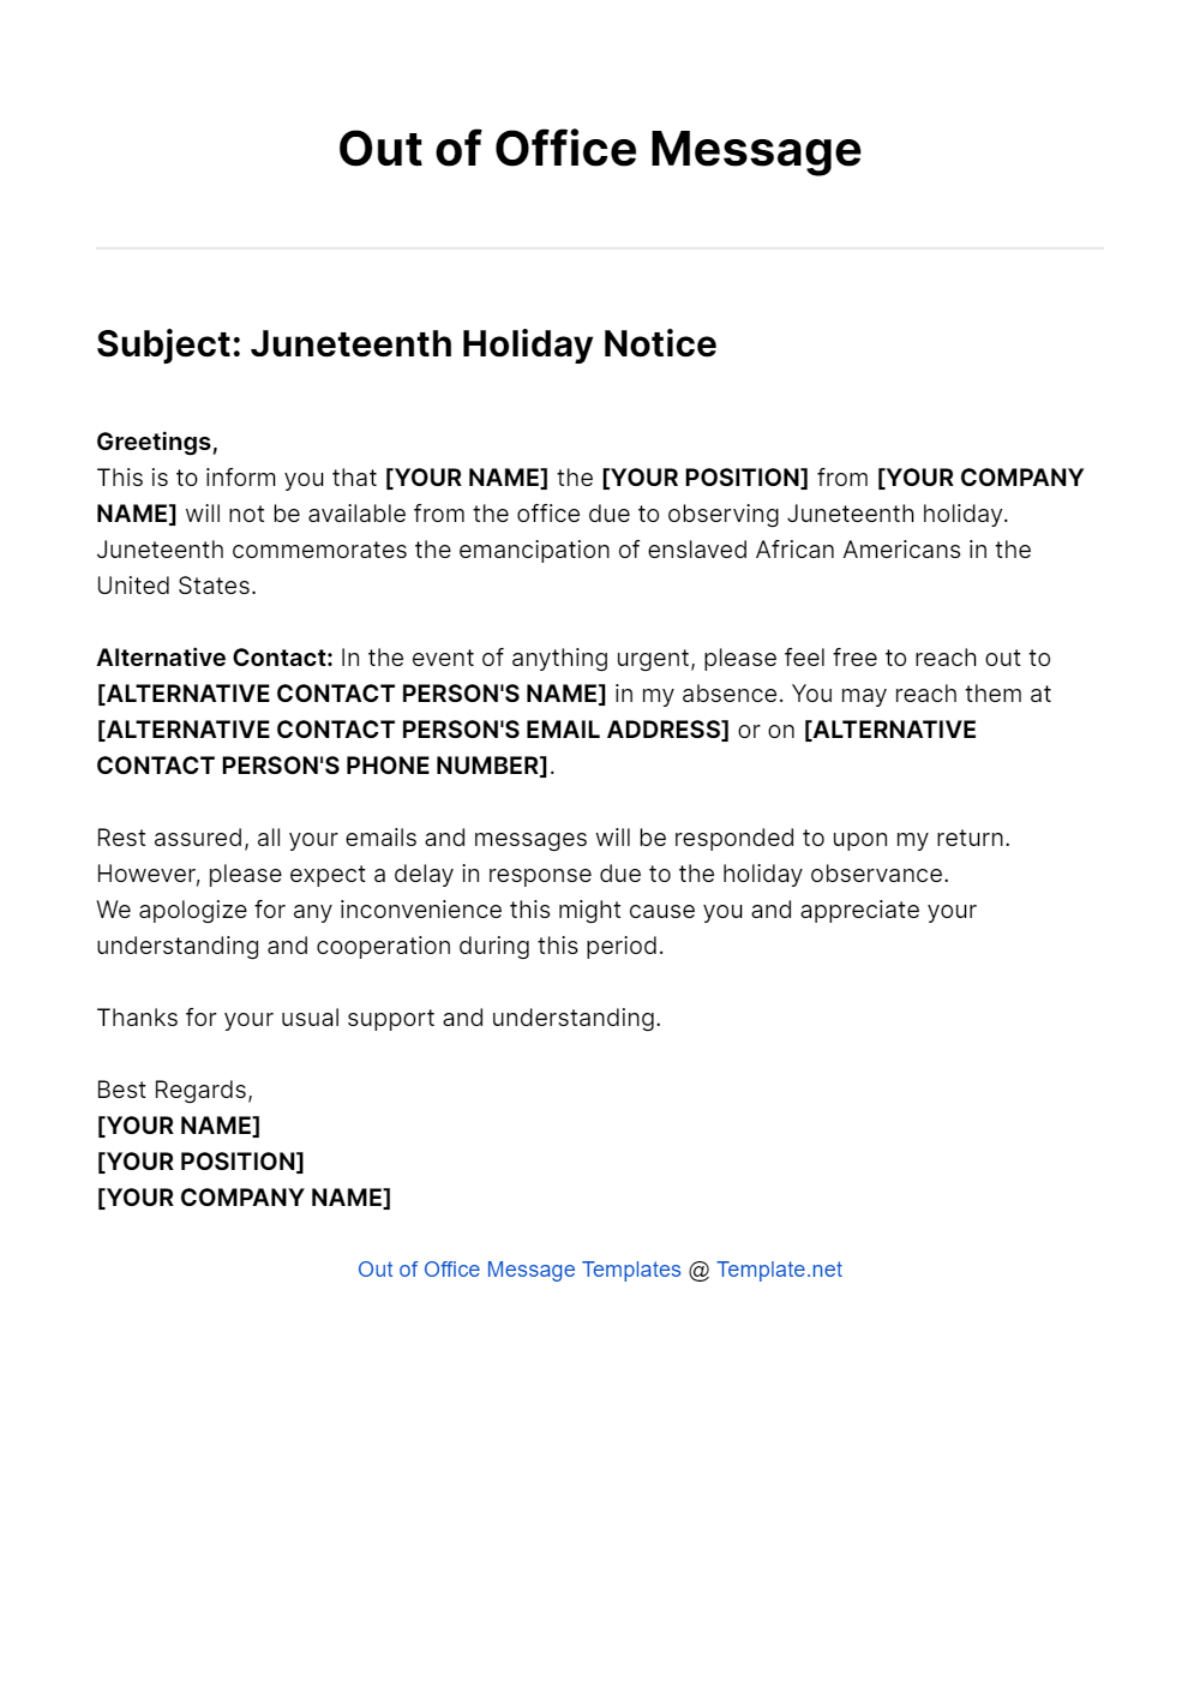 Juneteenth Holiday Out Of Office Message Template